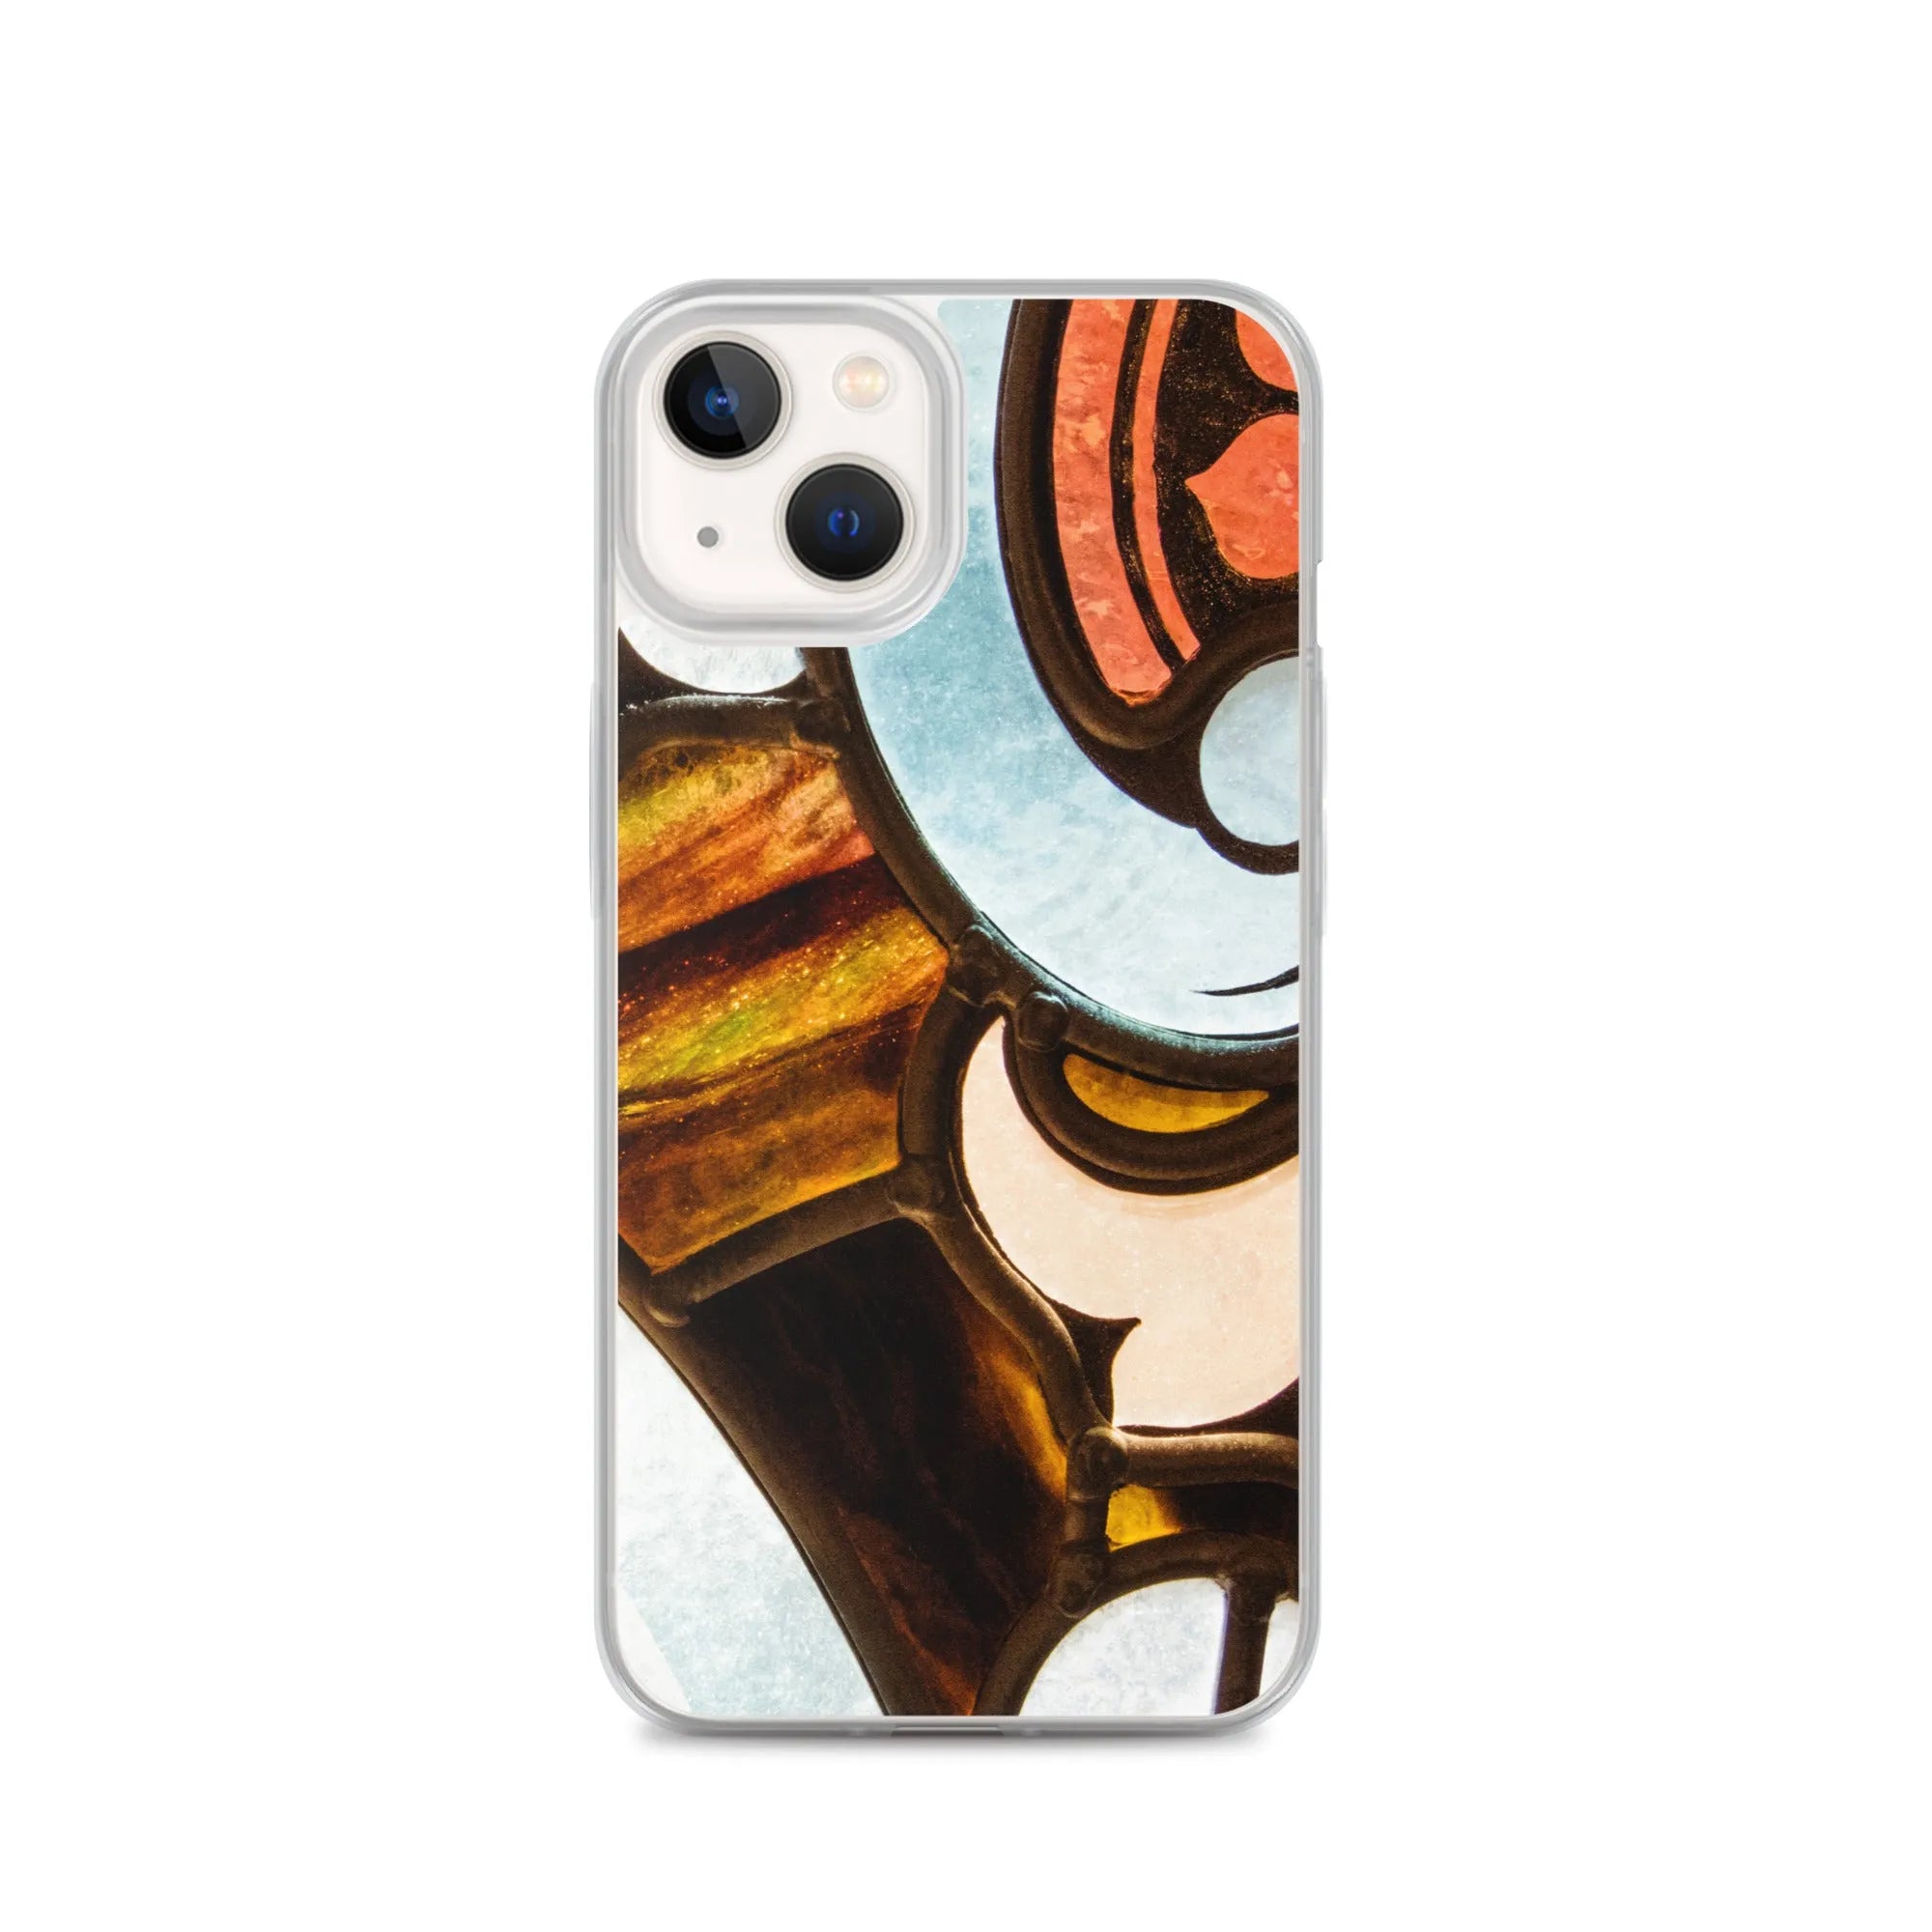 Stay Glassy - Designer Travels Art Iphone Case - Iphone 13 - Mobile Phone Cases - Aesthetic Art